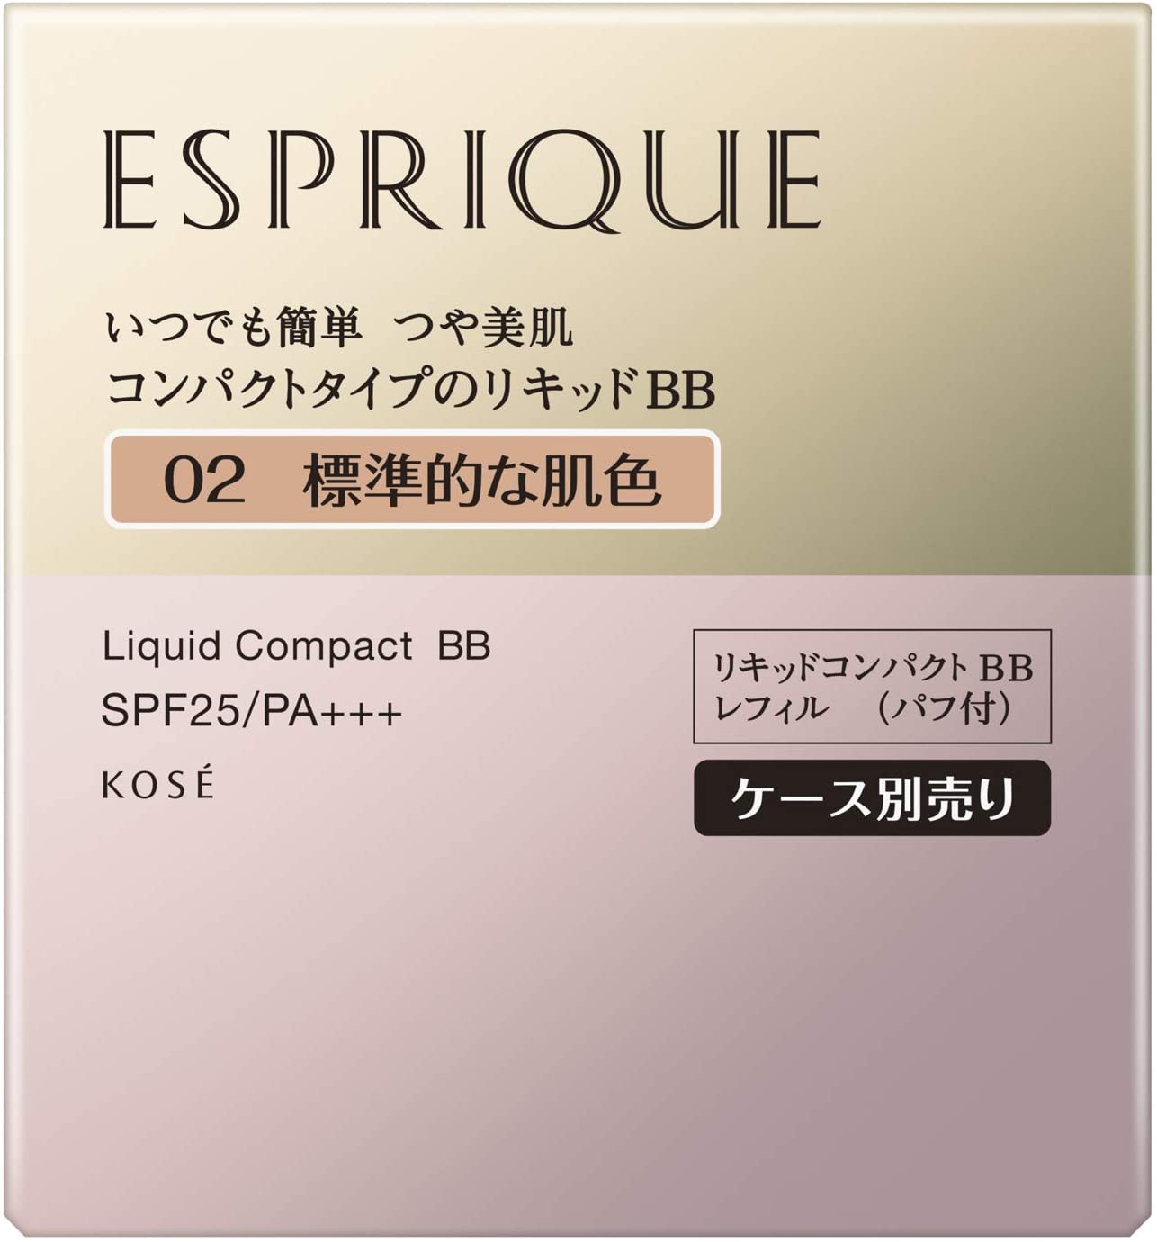 ESPRIQUE(エスプリーク) リキッド コンパクト BBの商品画像5 